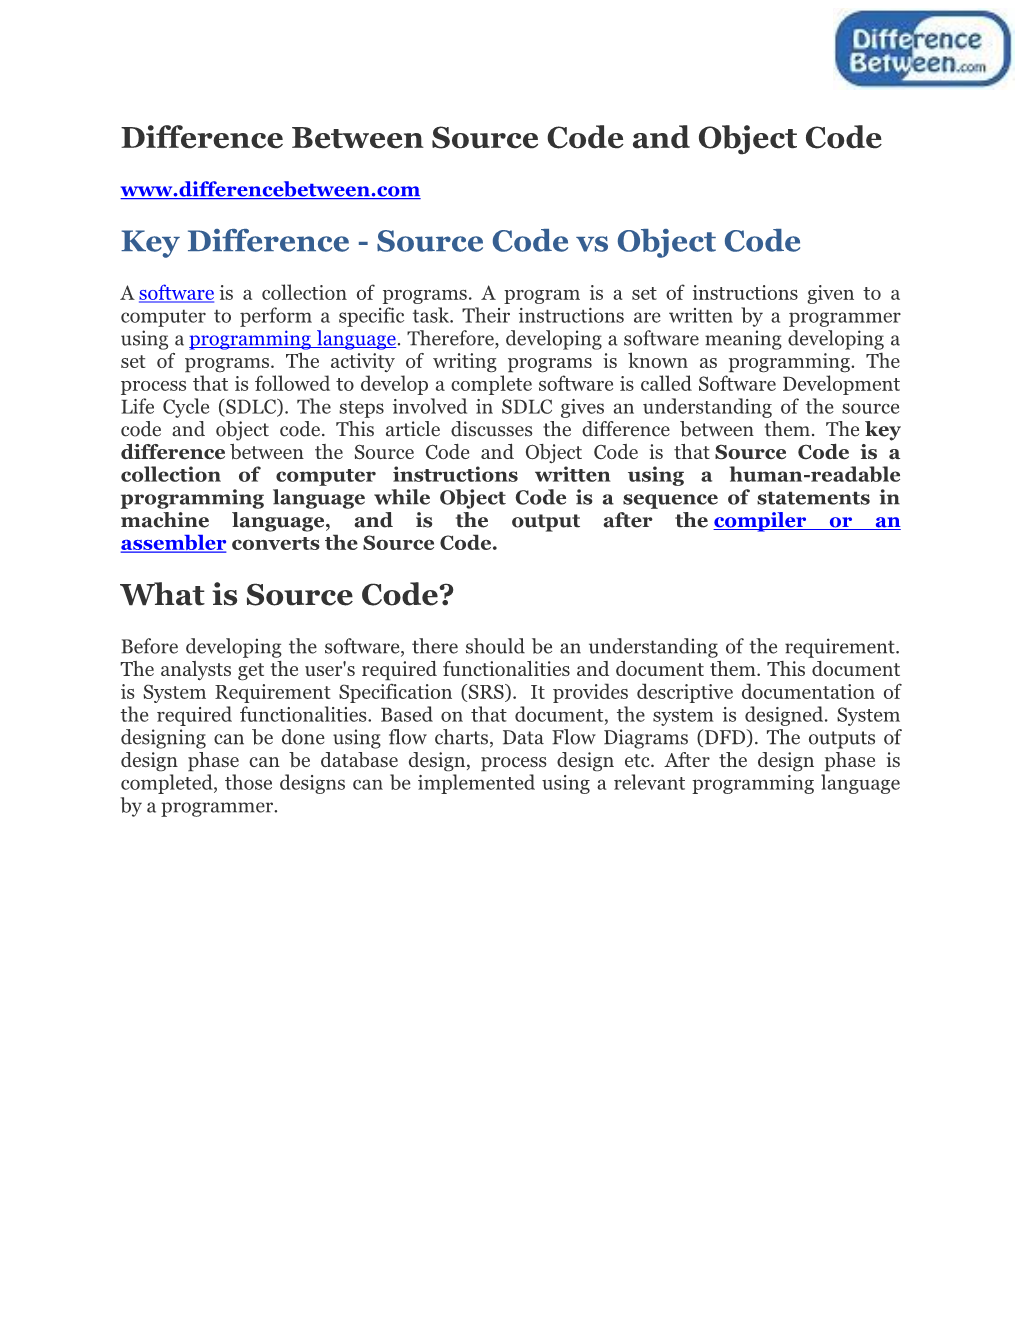 Difference Between Source Code and Object Code Key Difference